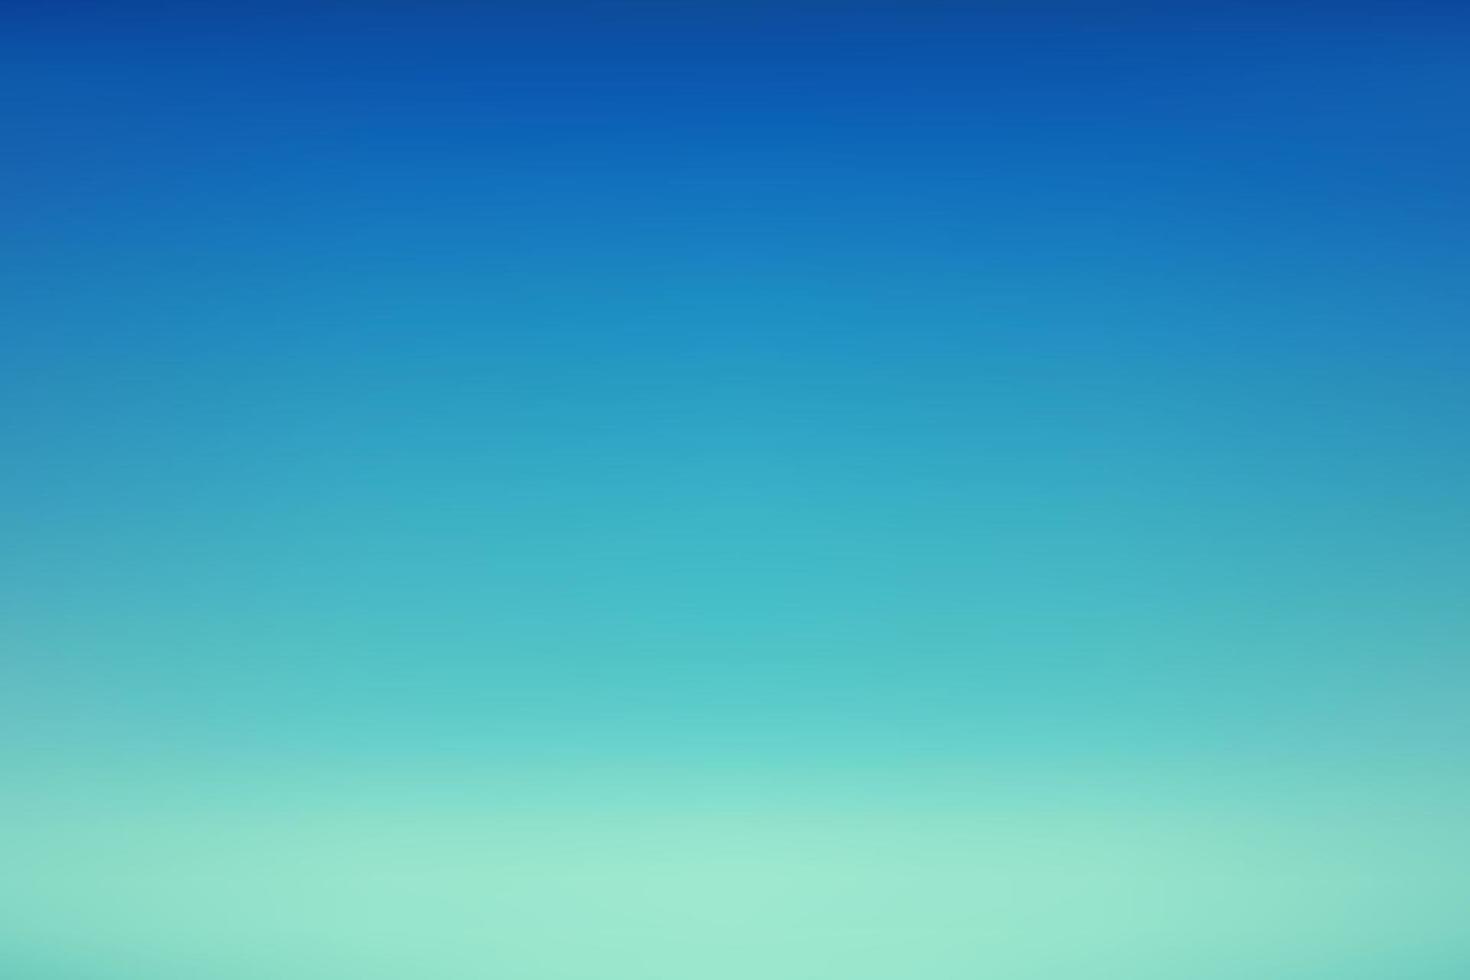 blue abstract blurred sky background vector